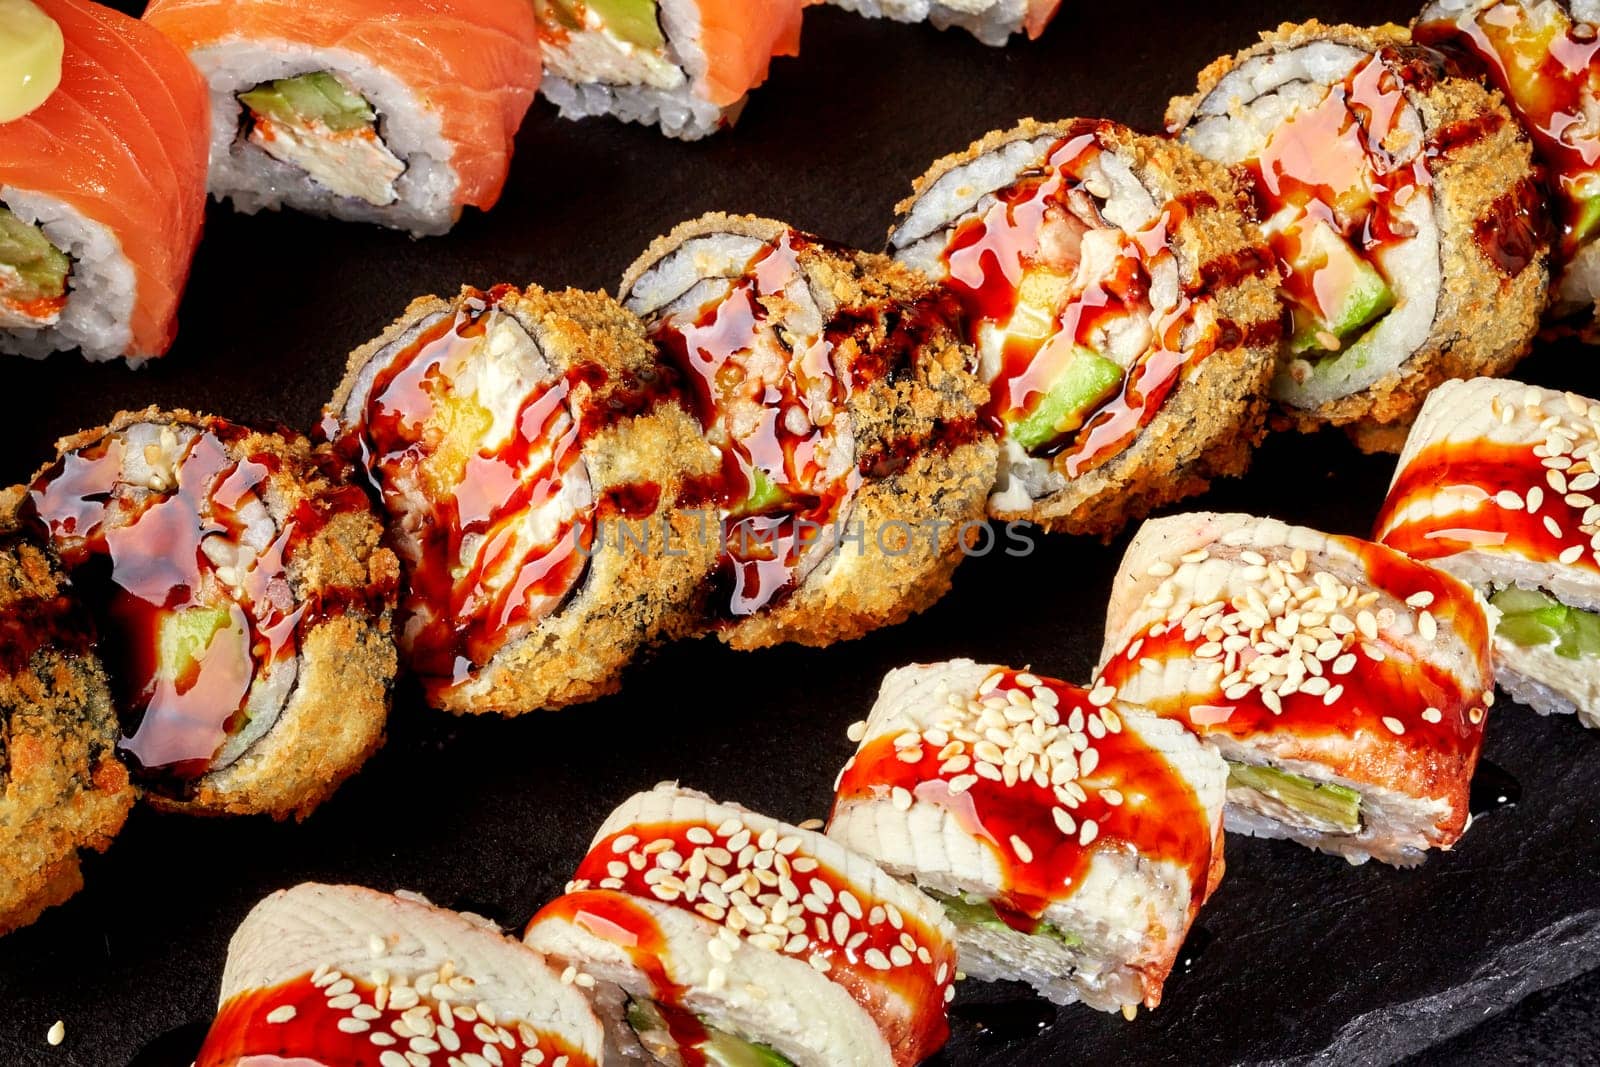 Appetizing crispy tempura rolls drizzled with unagi sauce, accompanied by ell and salmon topped uramaki served on black slate board, closeup detail view. Popular Japanese style snack